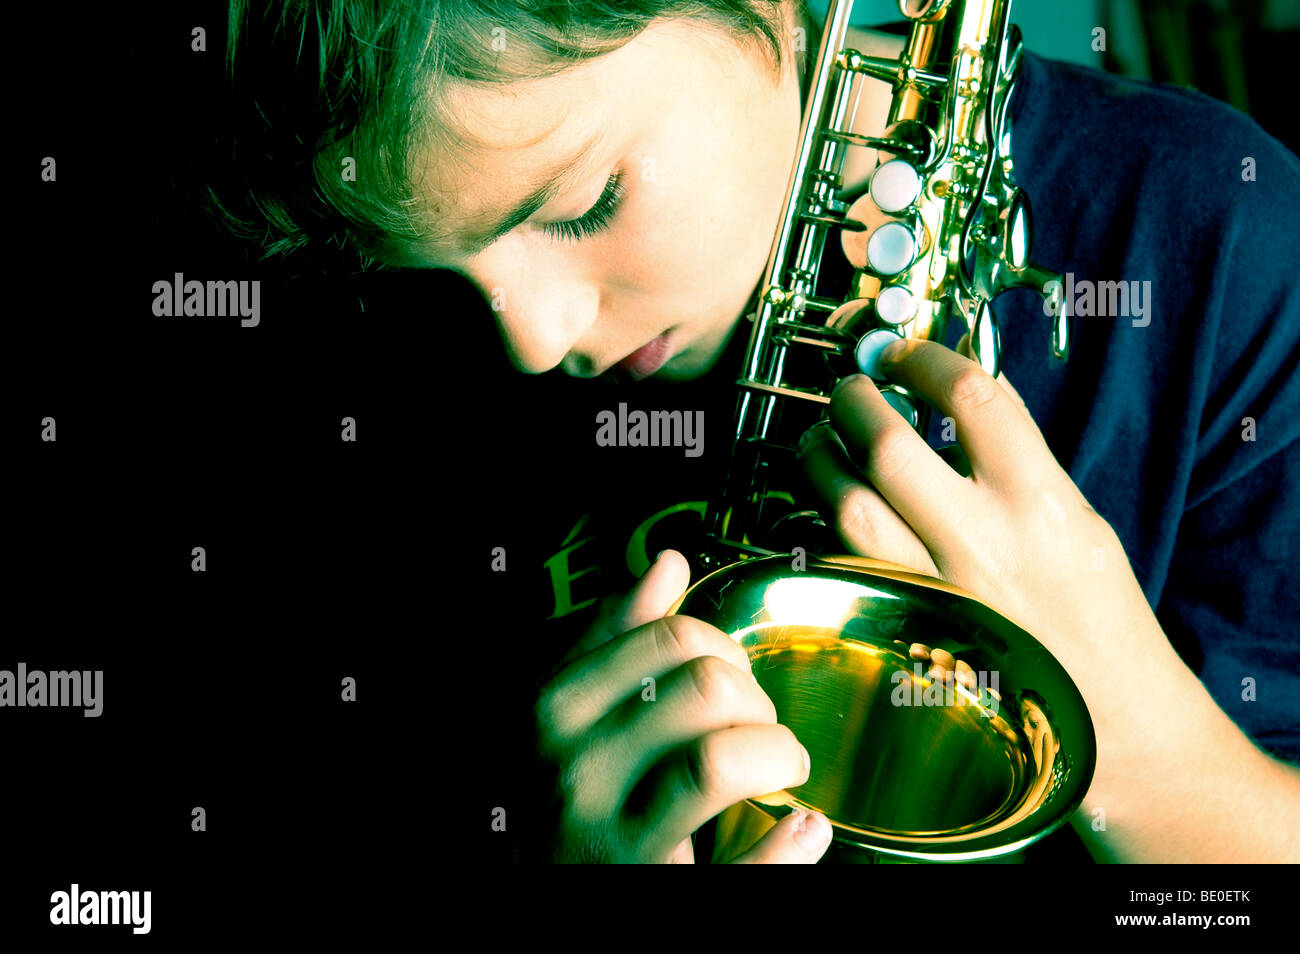 Young boy playing saxophone Stock Photo